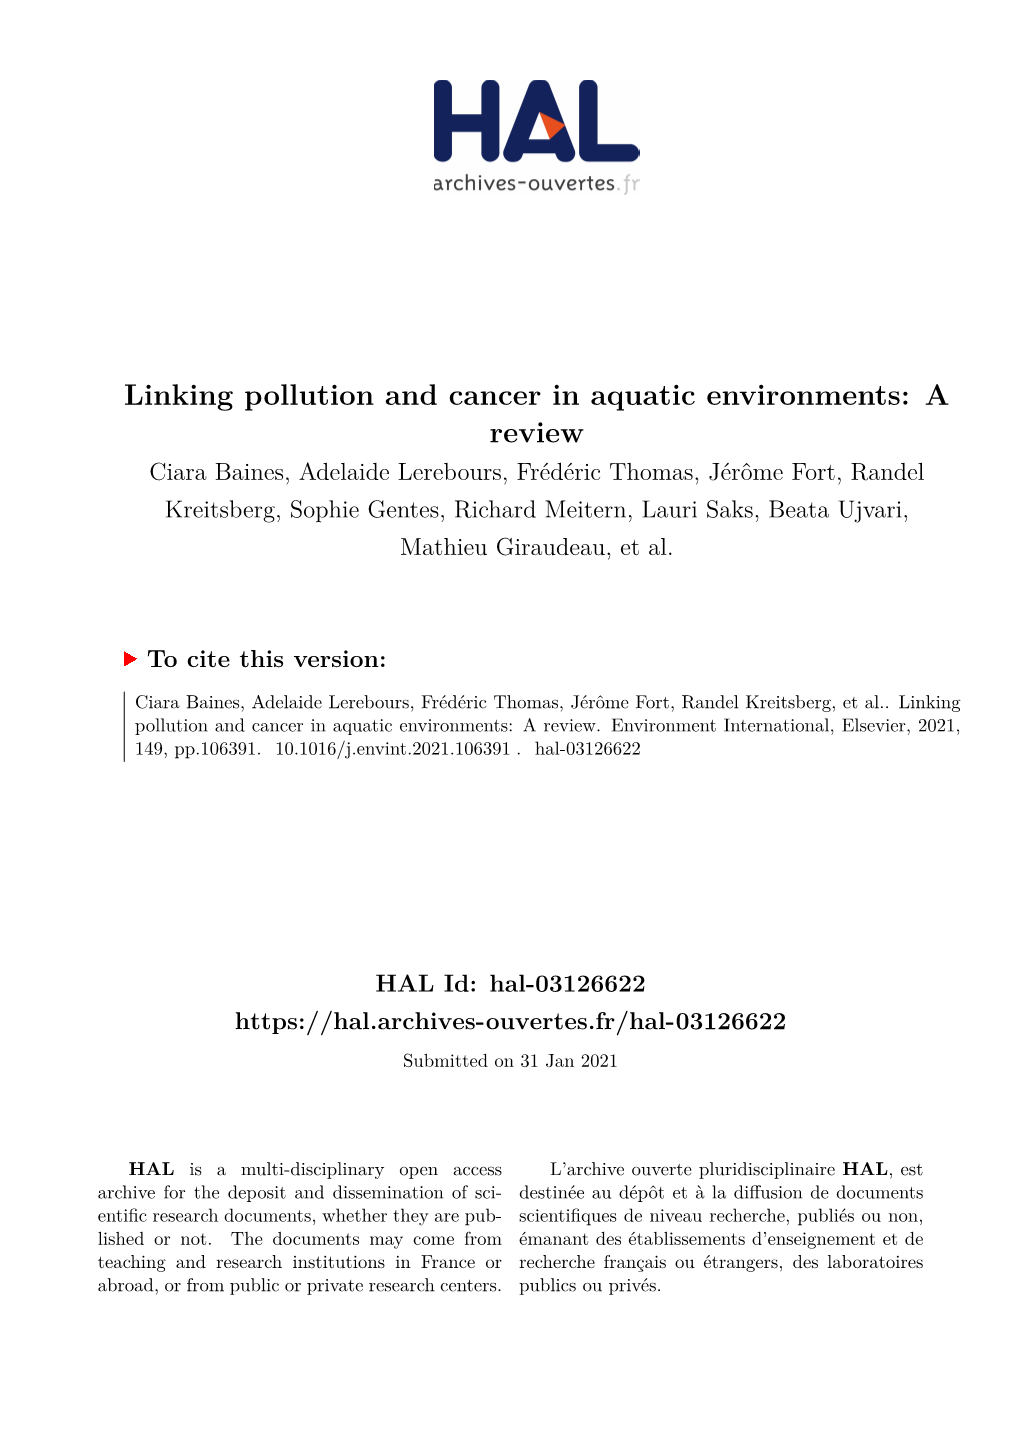 Linking Pollution and Cancer in Aquatic